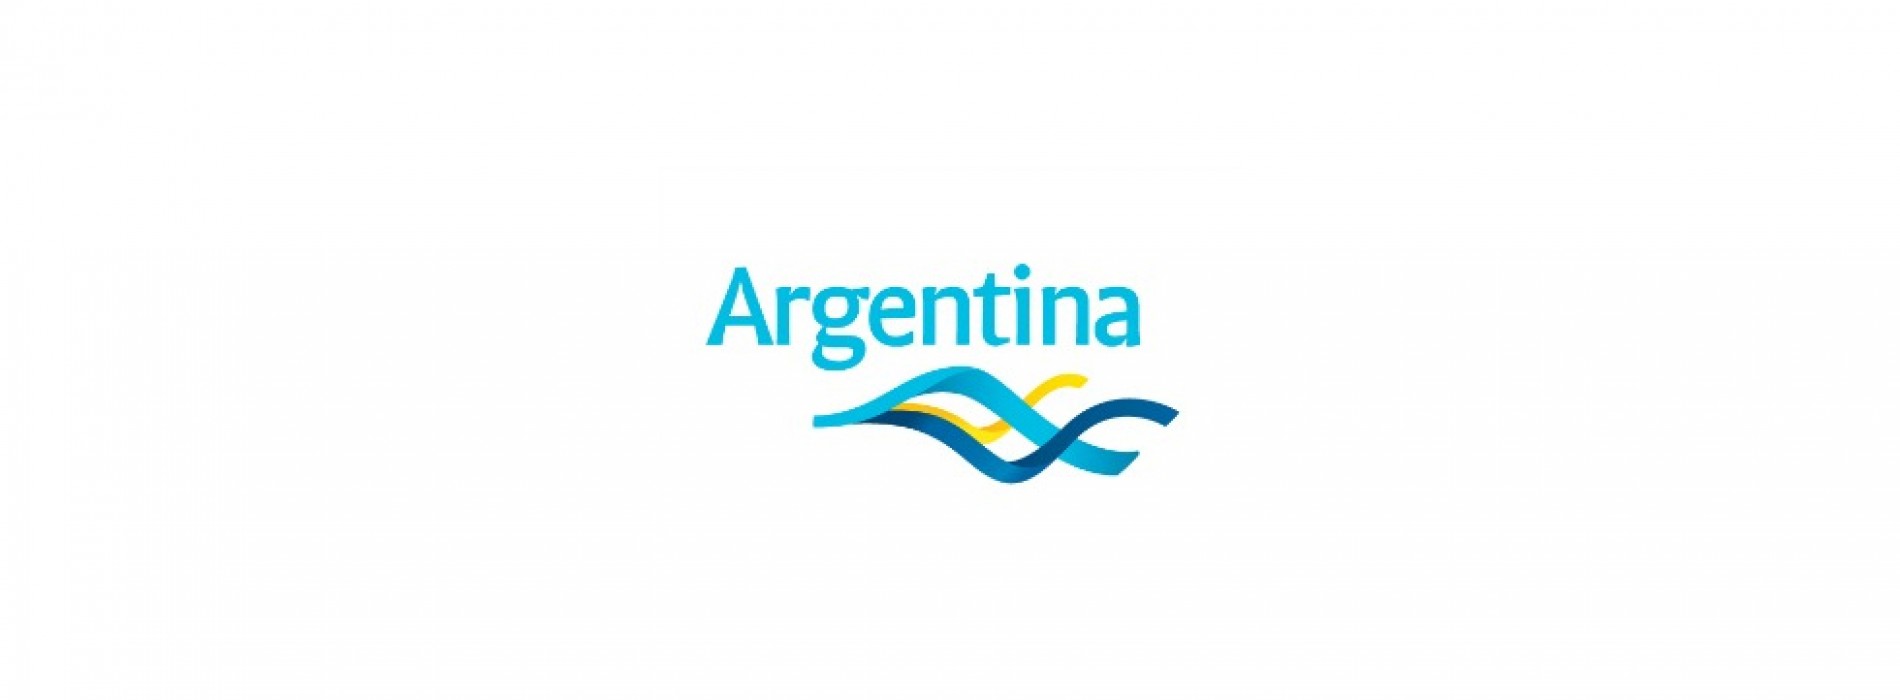 The LGBT Tourism Argentina present at ITB Berlin 2017